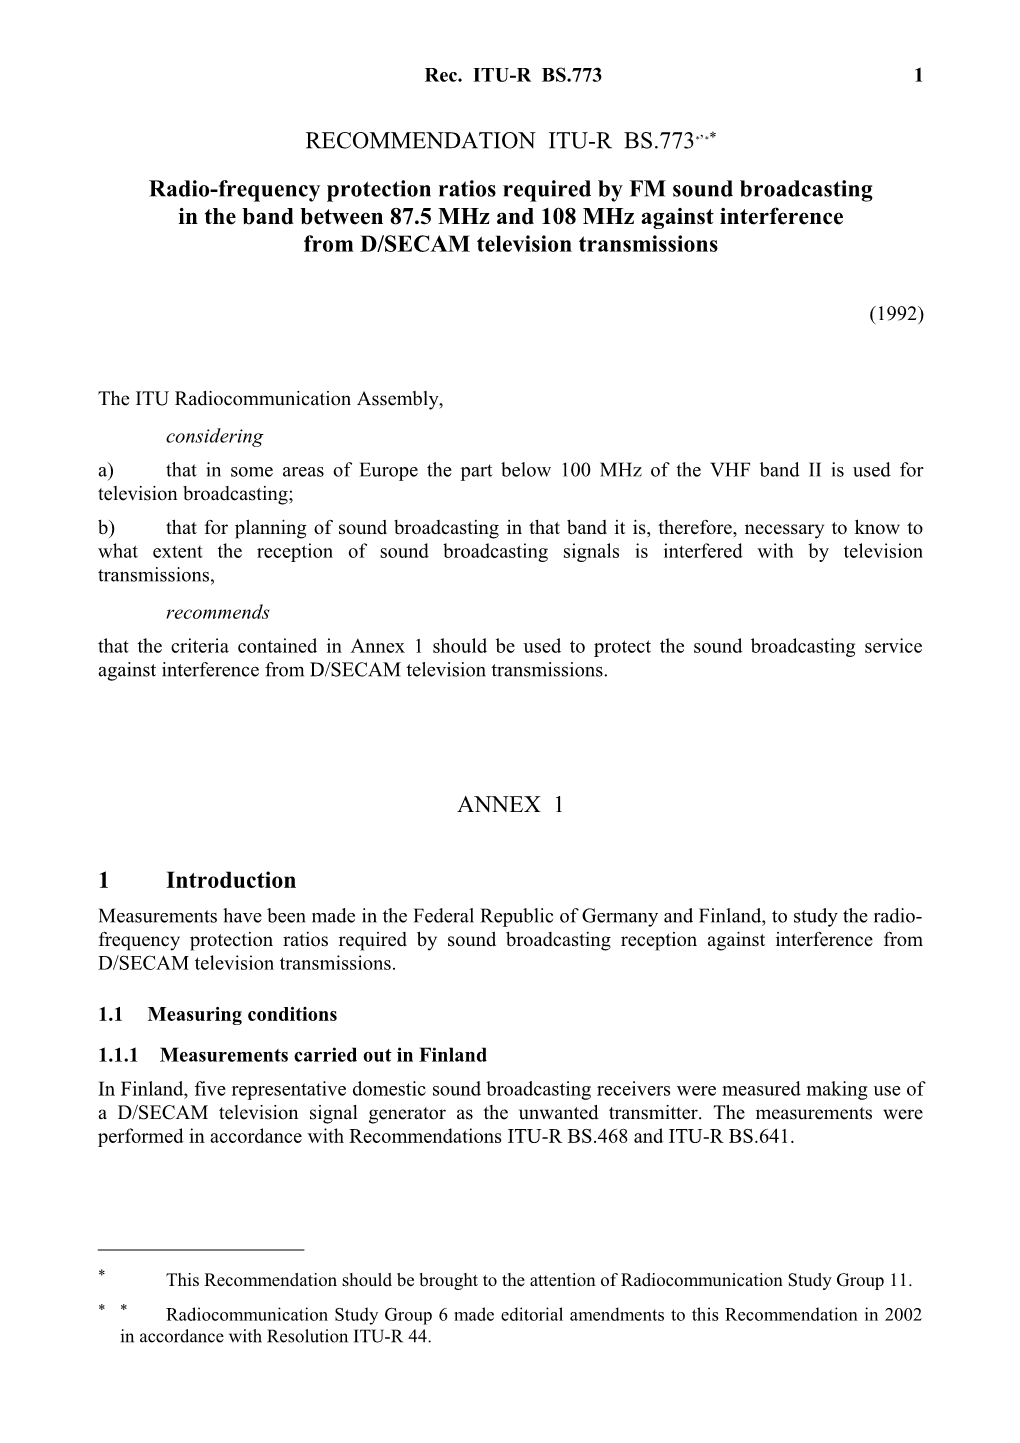 RECOMMENDATION ITU-R BS.773 - Radio-Frequency Protection Ratios Required by FM Sound